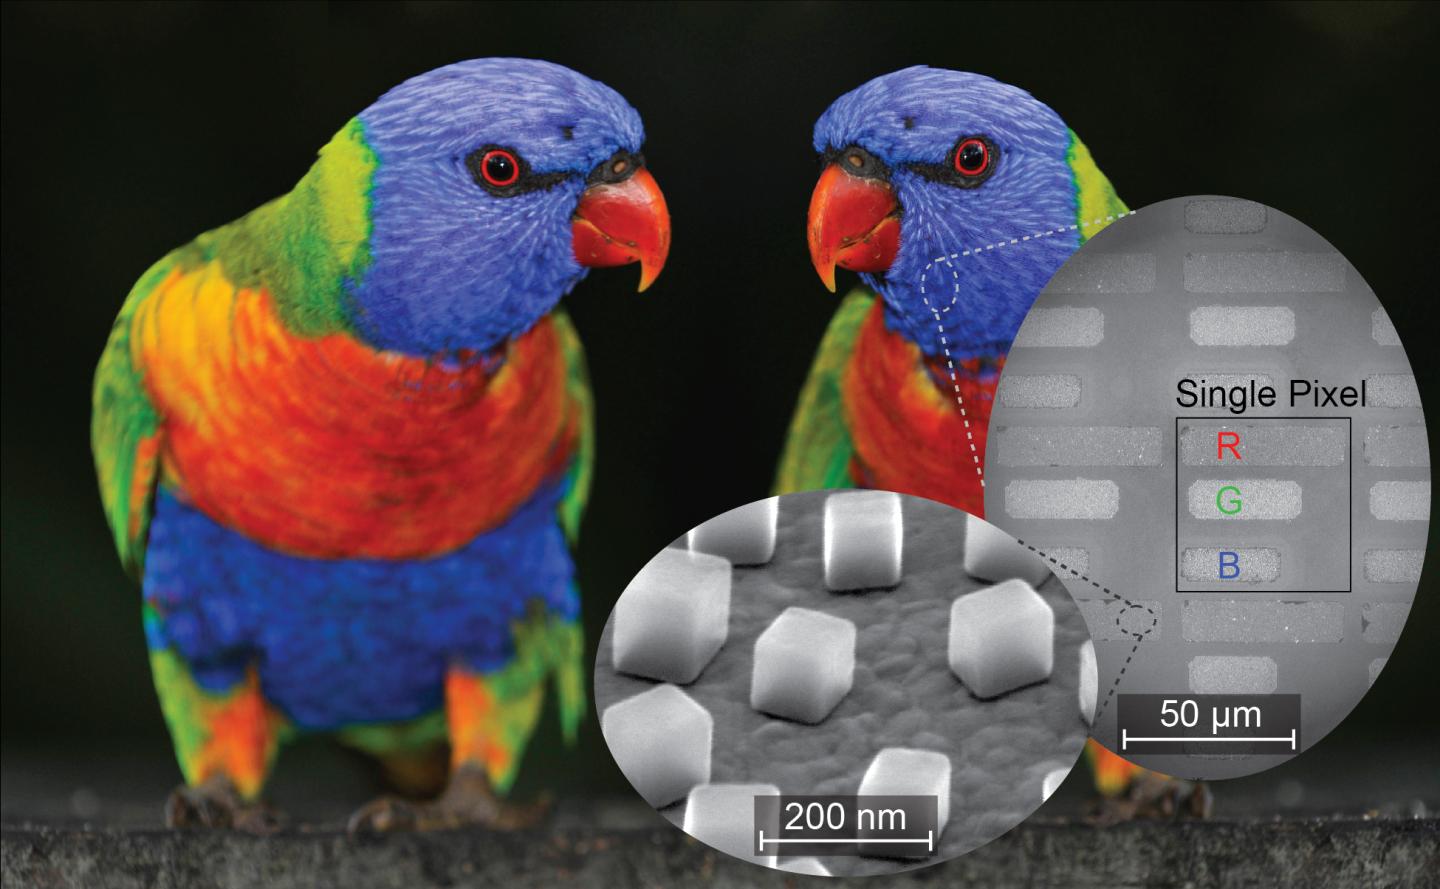 Researchers tested a new technique for printing and imaging in both color and infrared with this image of a parrot